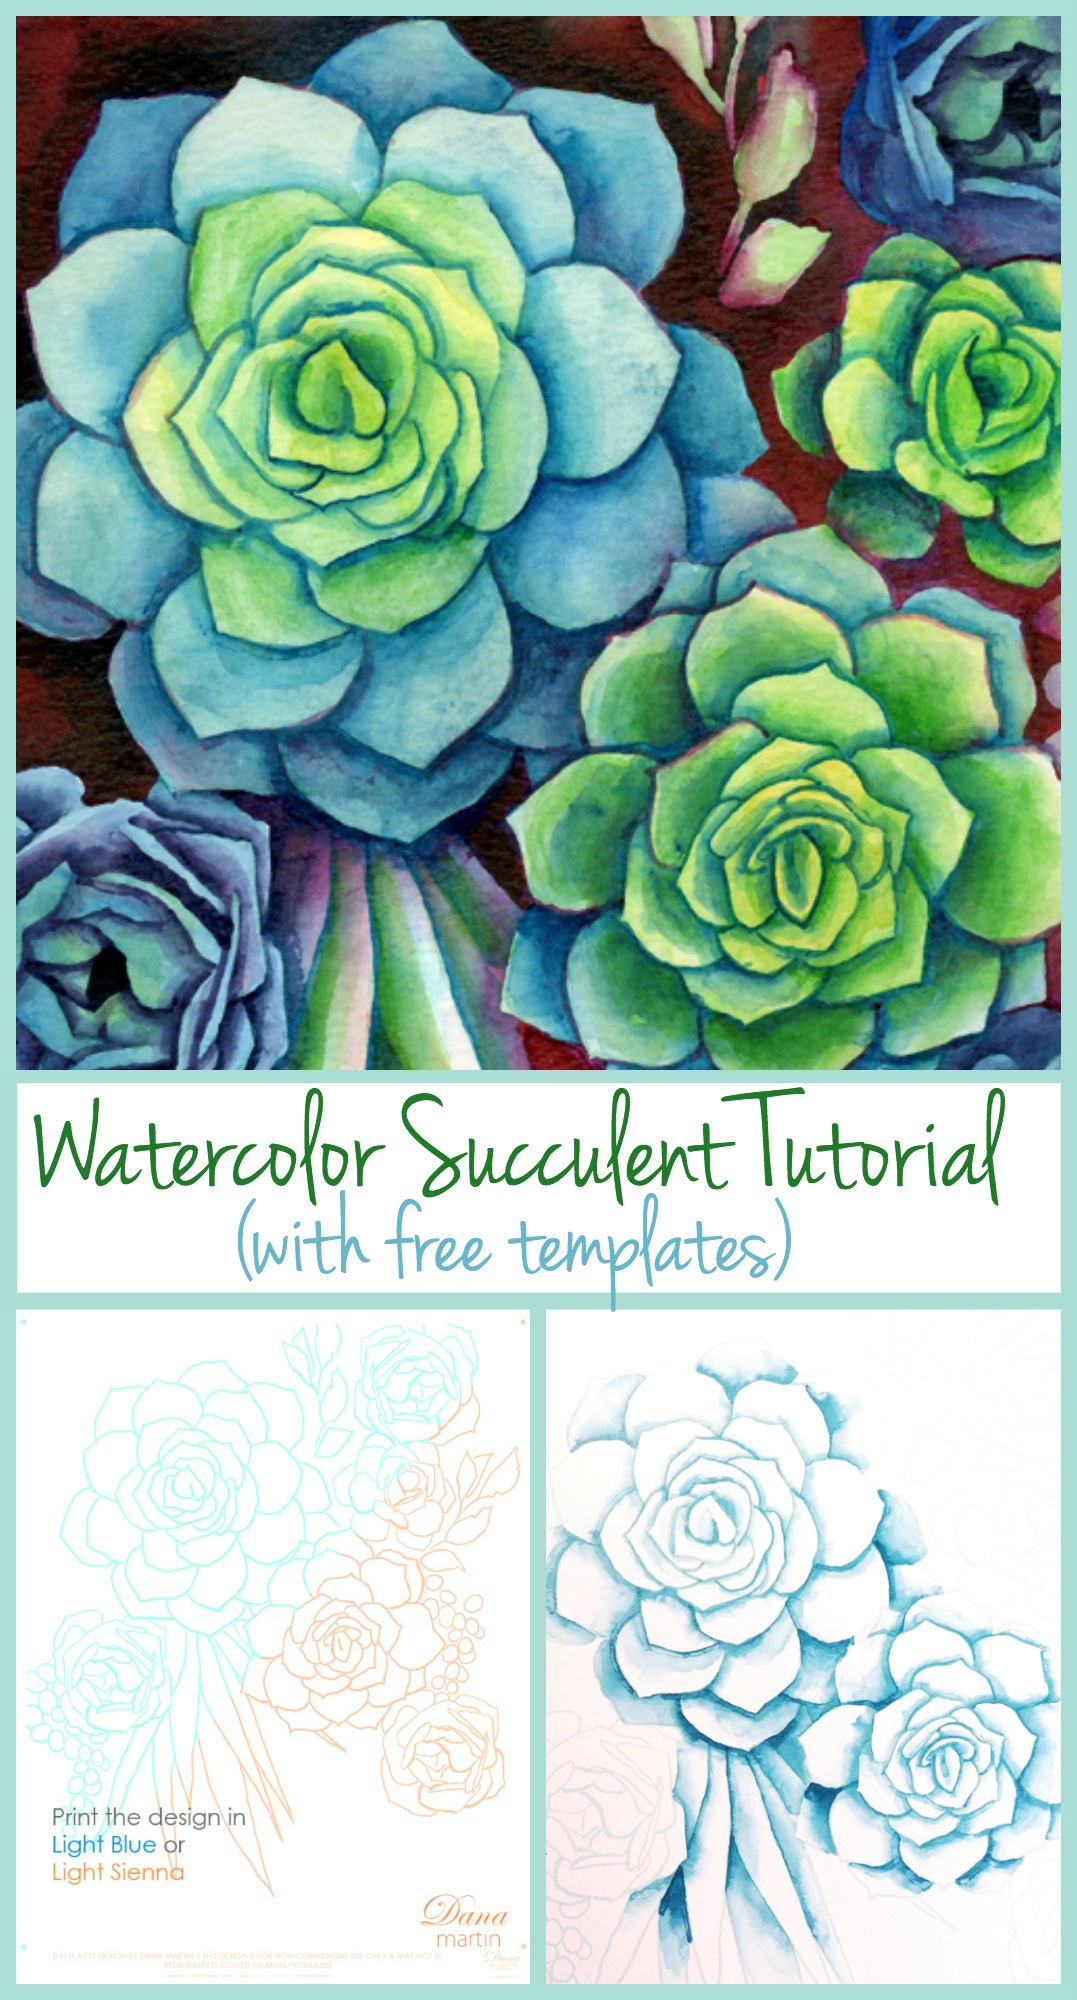 DIY Watercolor Succulents by Dana Martin - includes free templates!